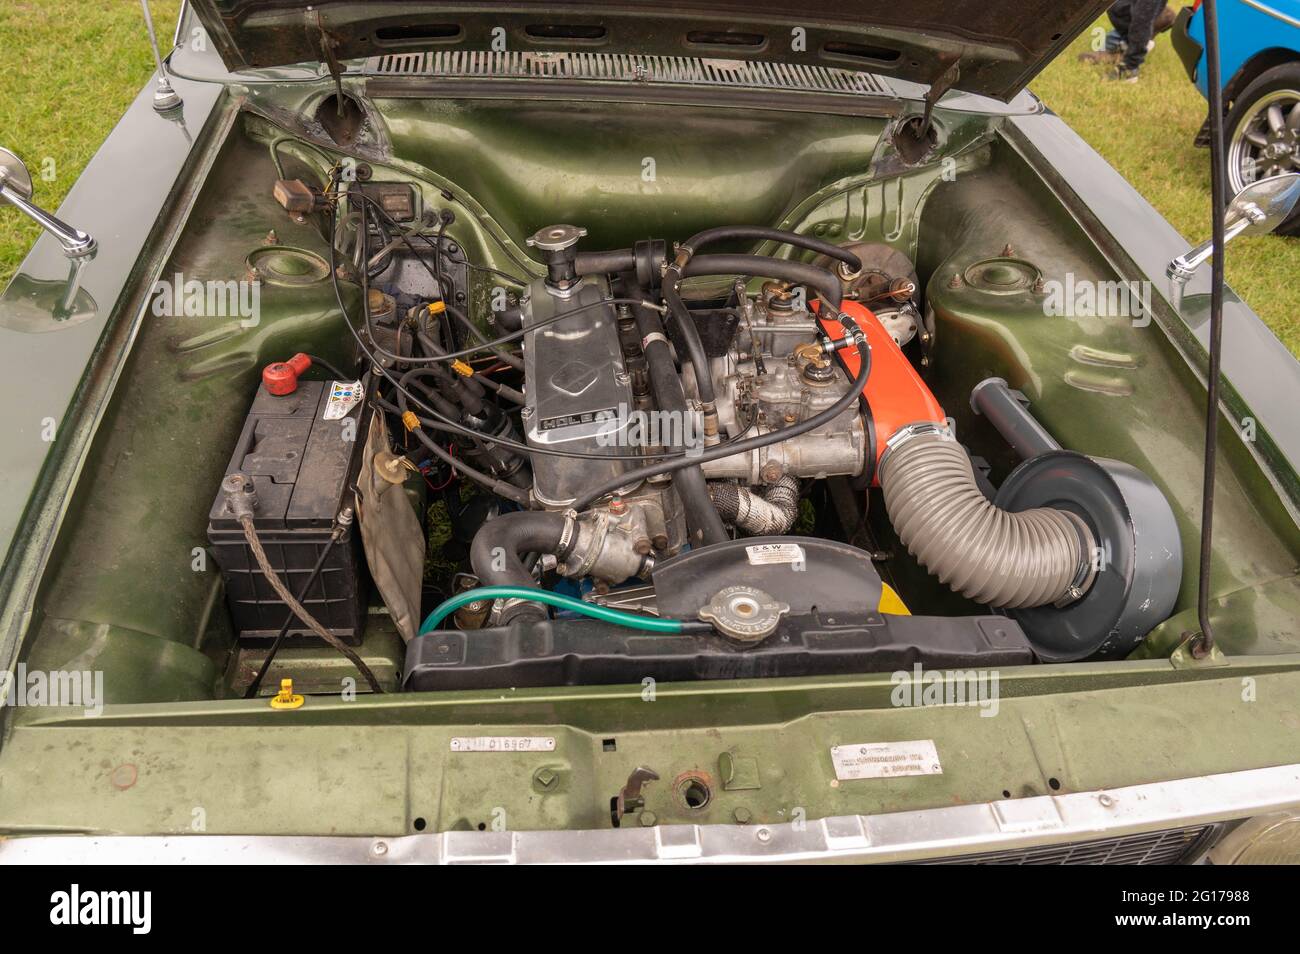 A view of a Holbay H120 engine in a hillman hunter with twin side draft carburettors Stock Photo